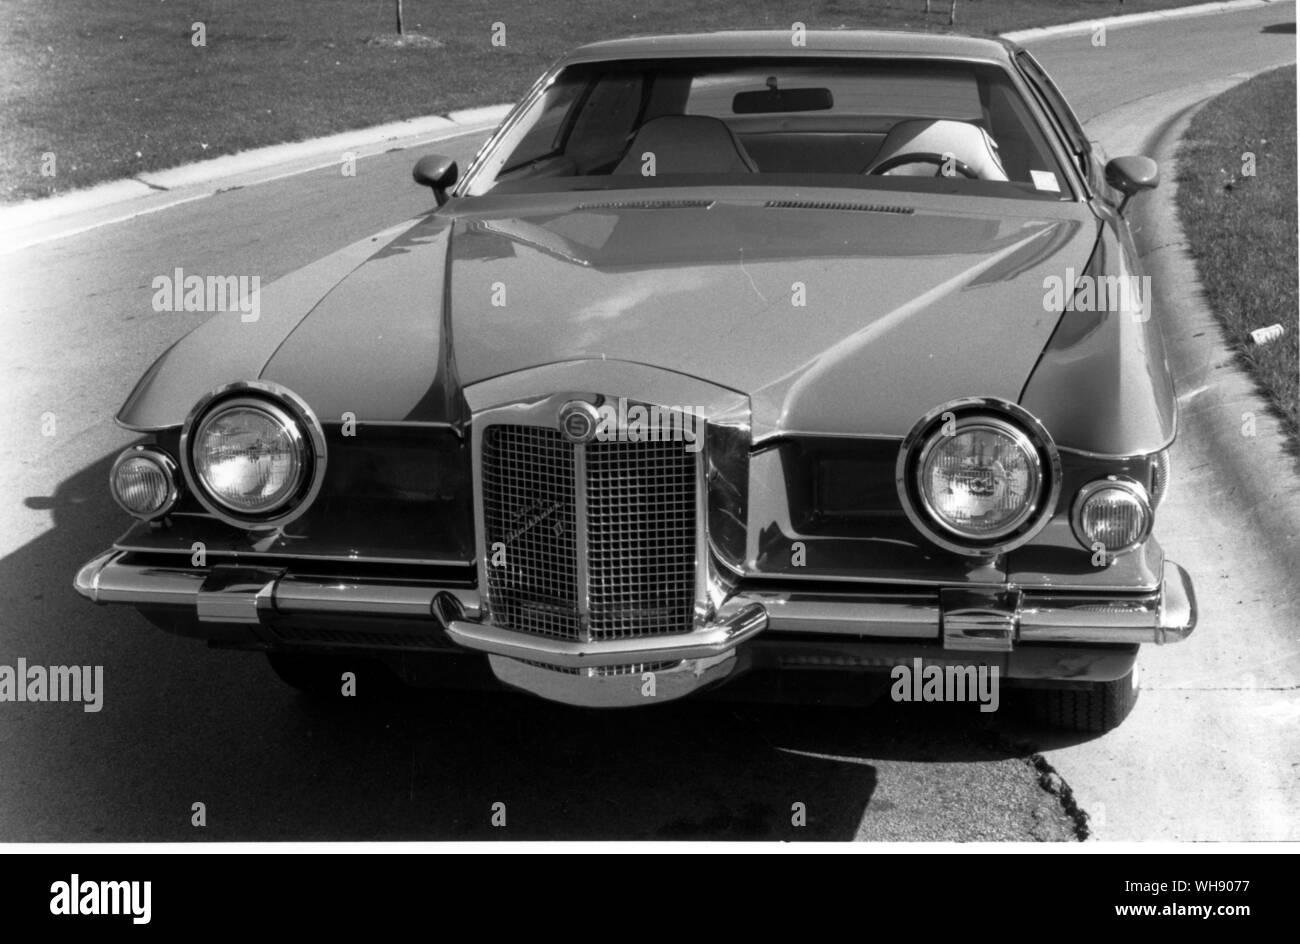 The Pontiac-based Stitz Blackhawk, launched in 1970, is a Virgil Exner-styled $75,000 luxury car with gold-plated trim.. Stock Photo